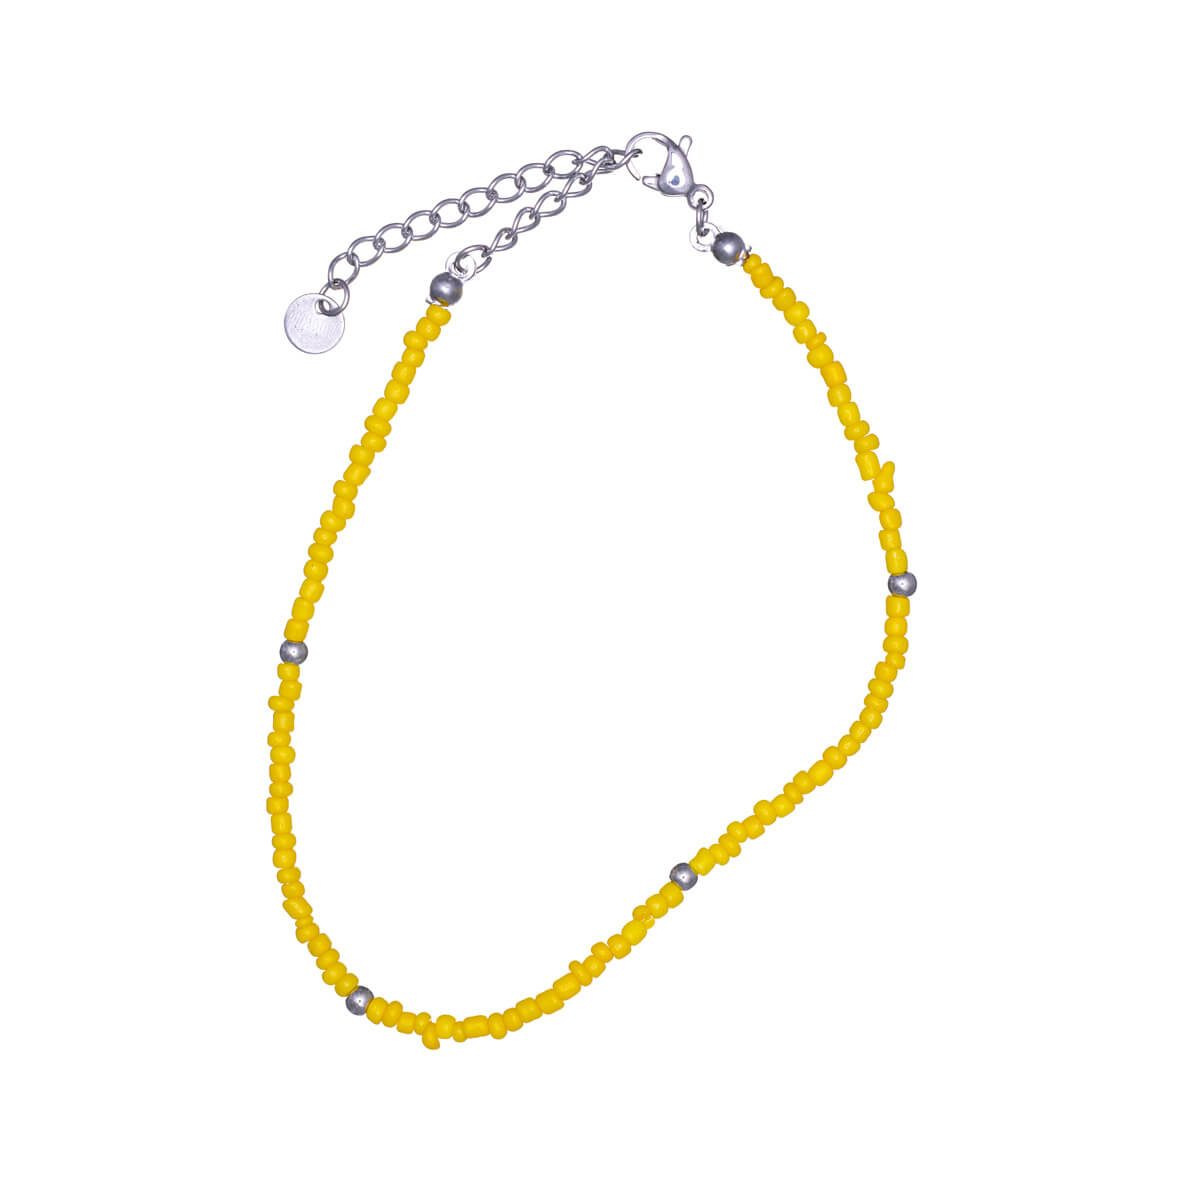 Steel ankle chain with small coloured beads (Steel 316L)